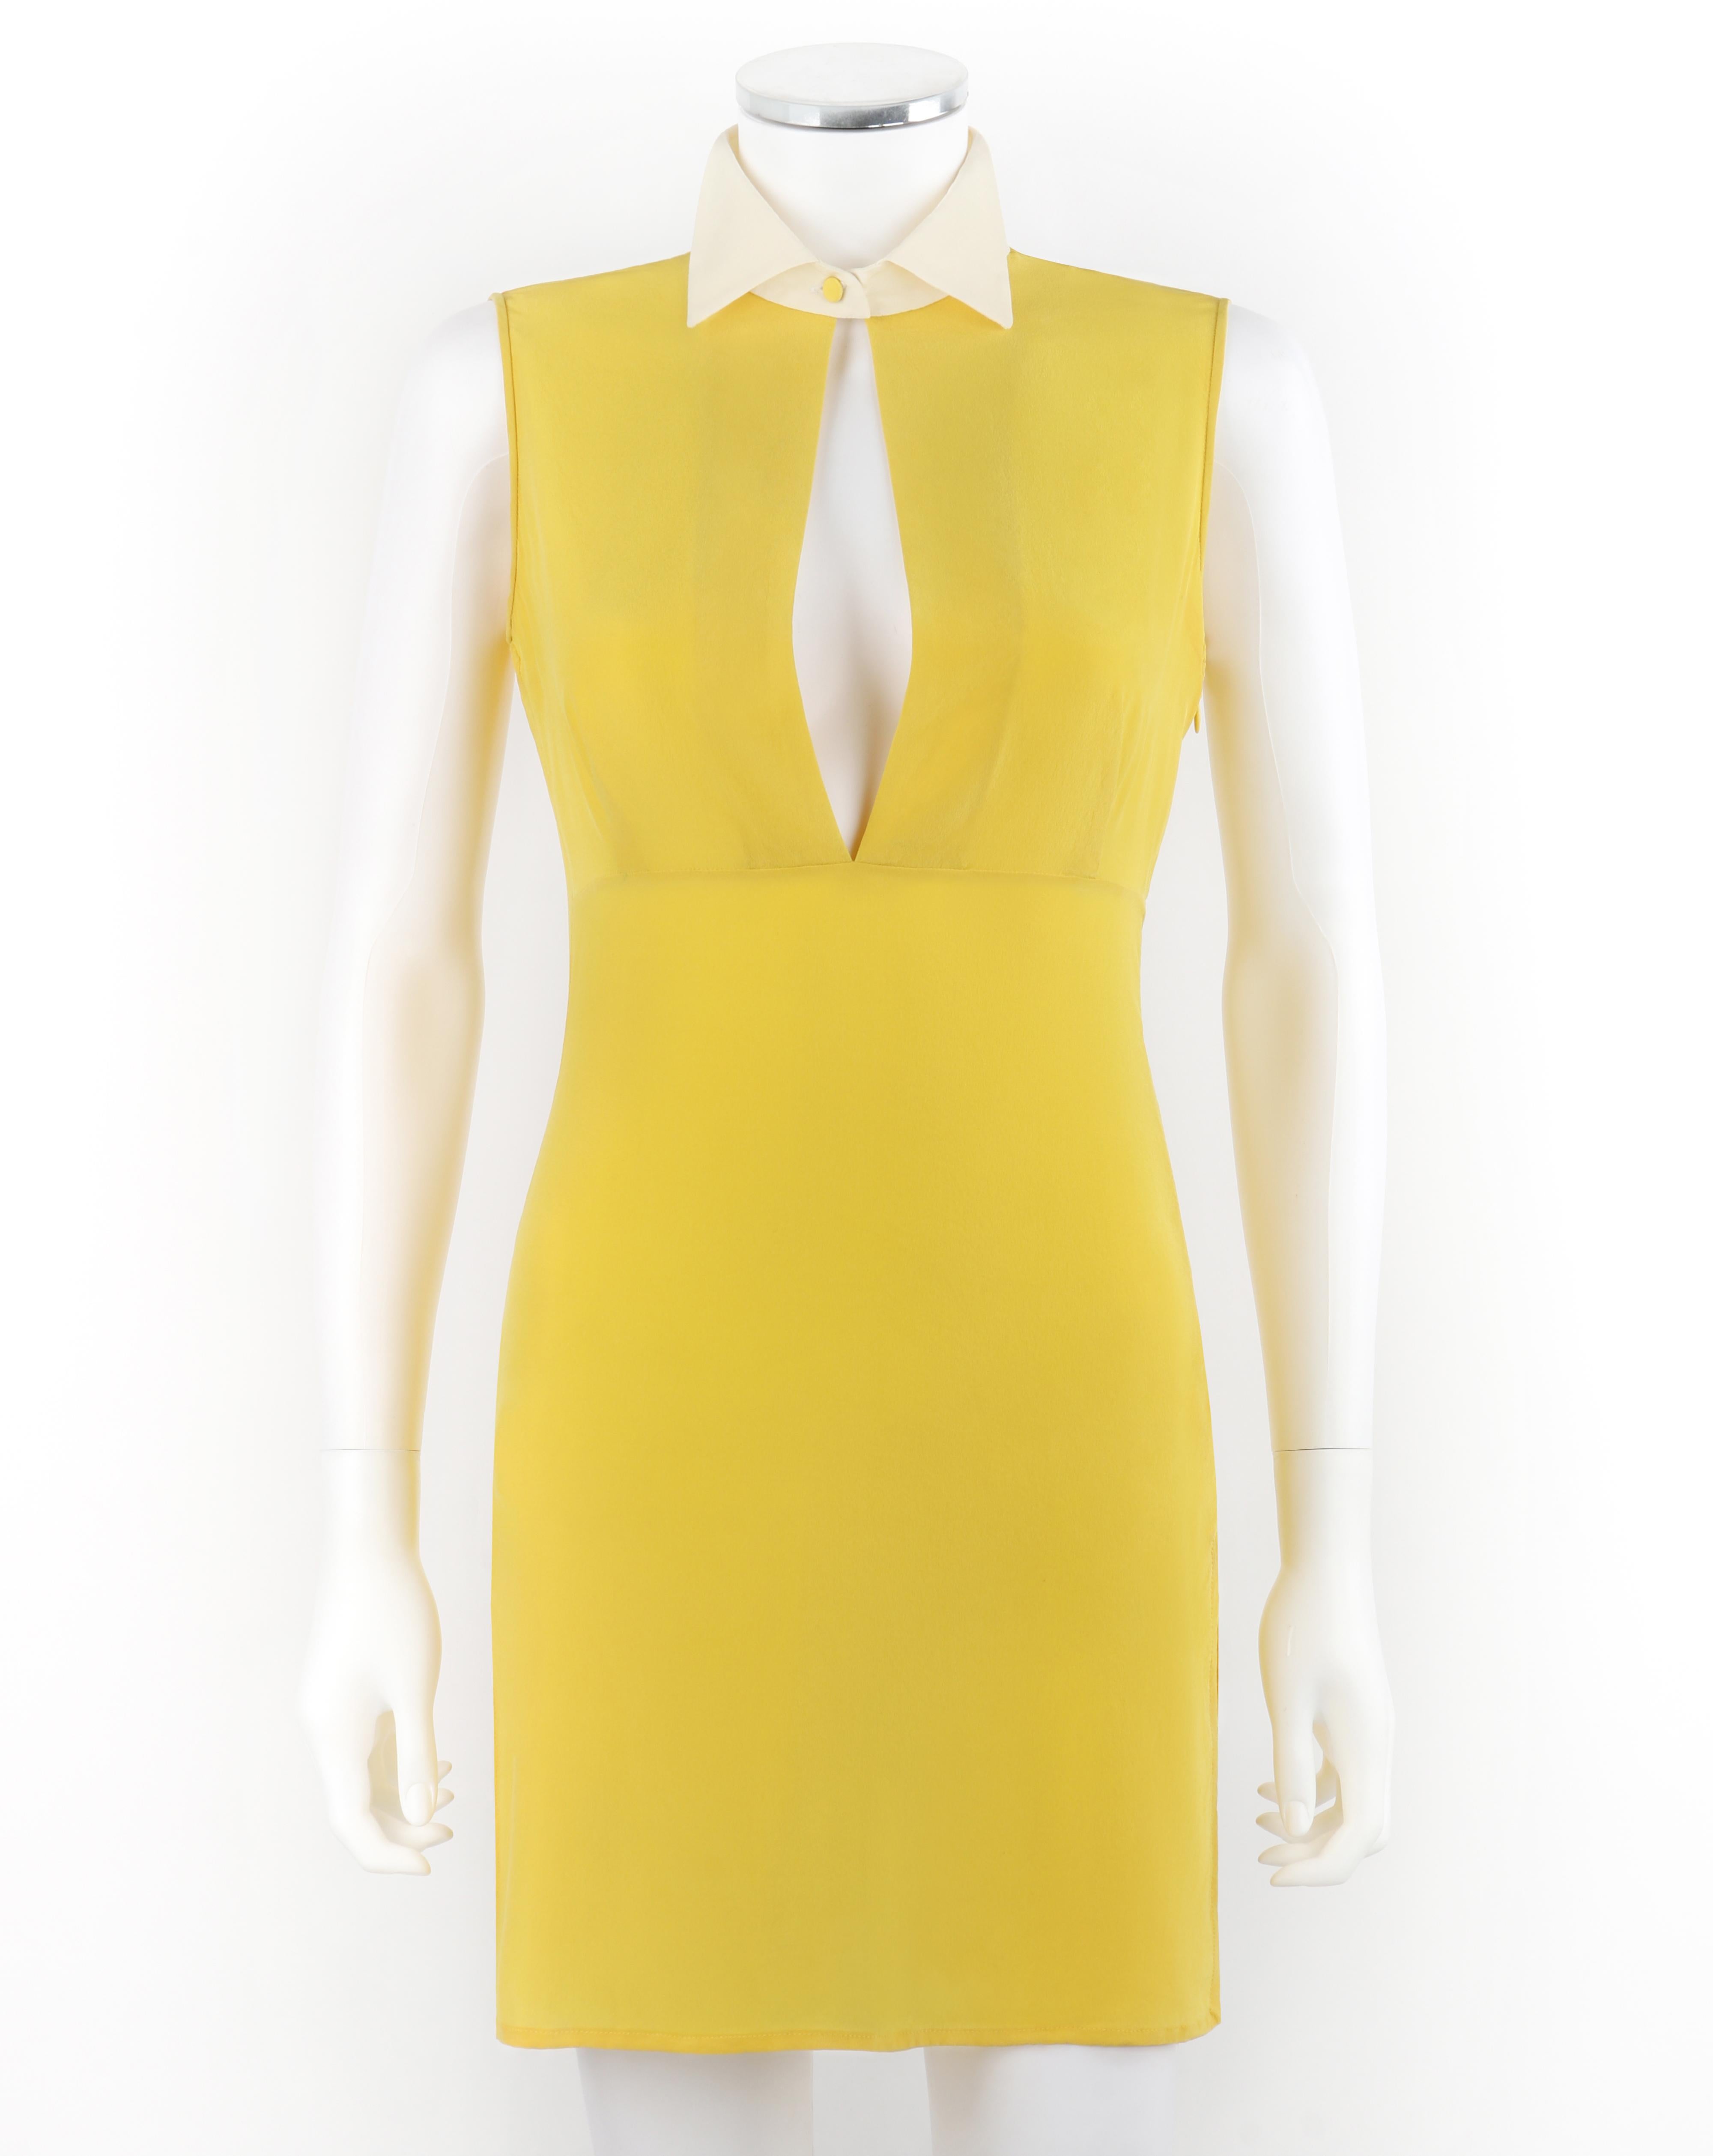 ALEXANDER McQUEEN c.2010 Yellow White Chiffon Keyhole Double Slit Mini Dress

Brand / Manufacturer: Alexander McQueen 
Circa: 2010
Designer: Alexander McQueen
Style: Mini Dress
Color(s): Shades of yellow, white
Lined: No
Unmarked Fabric Content